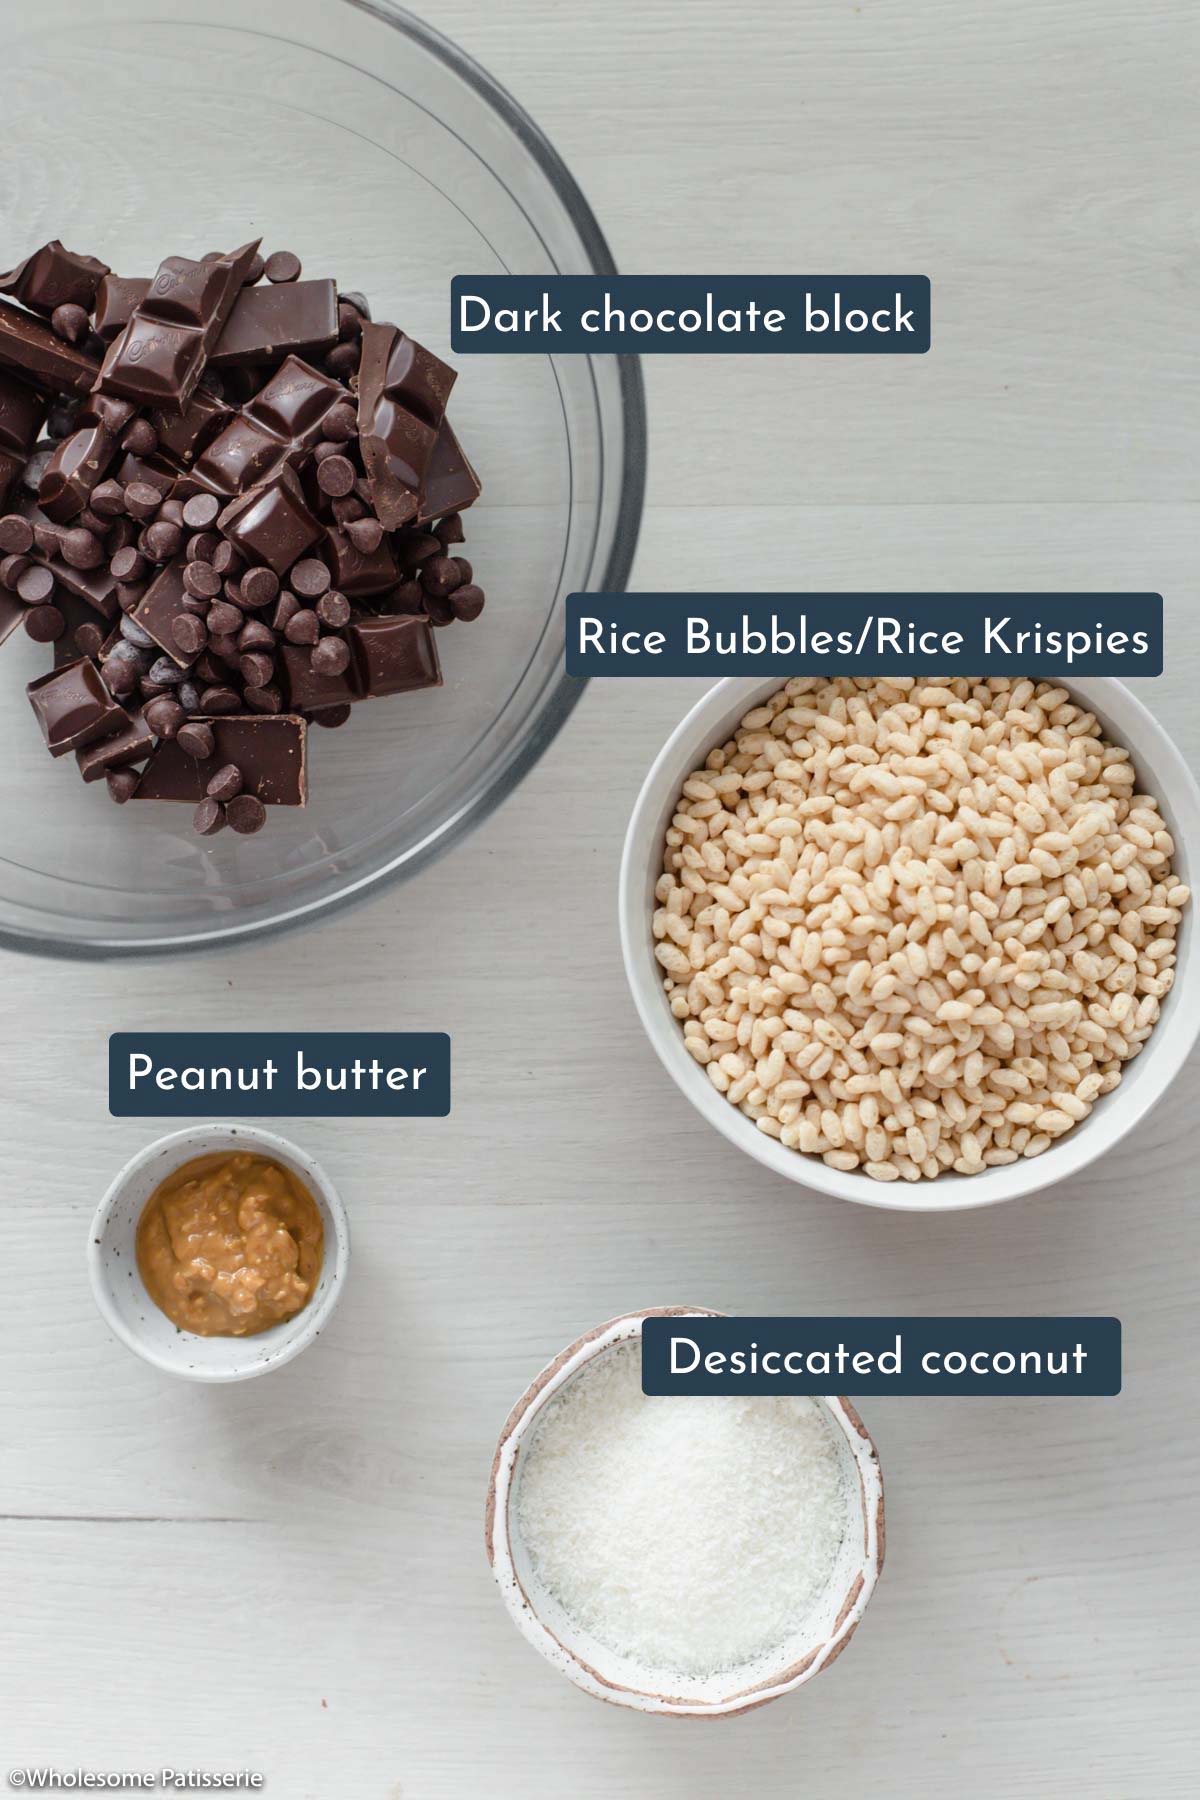 Ingredients needed to make these chocolate crackles